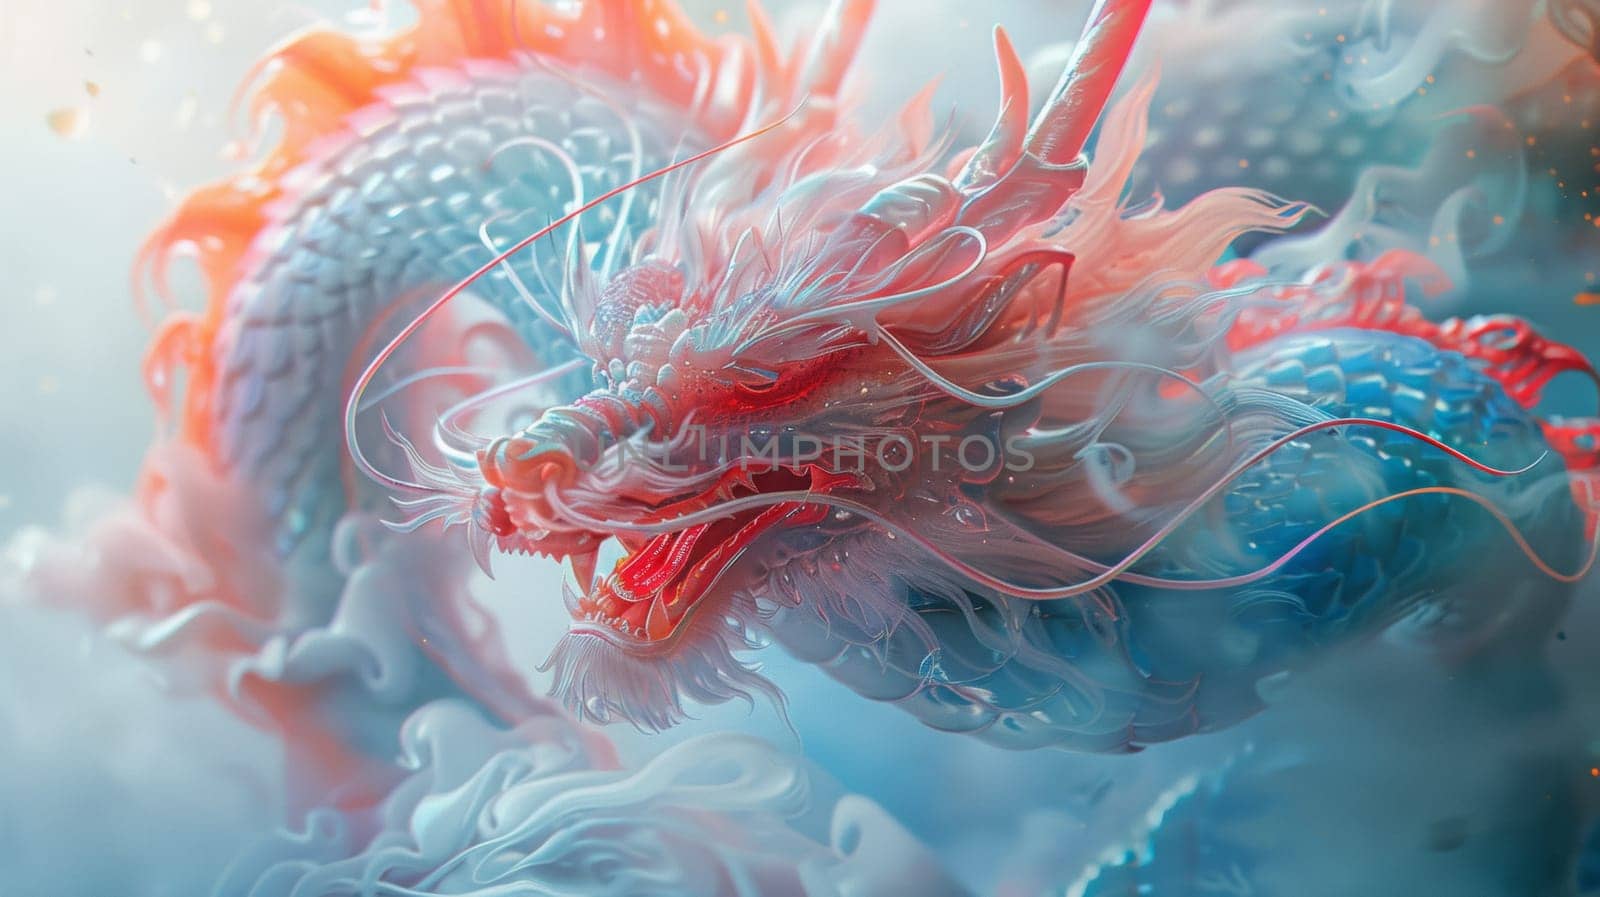 A close up of a dragon with red and blue colors